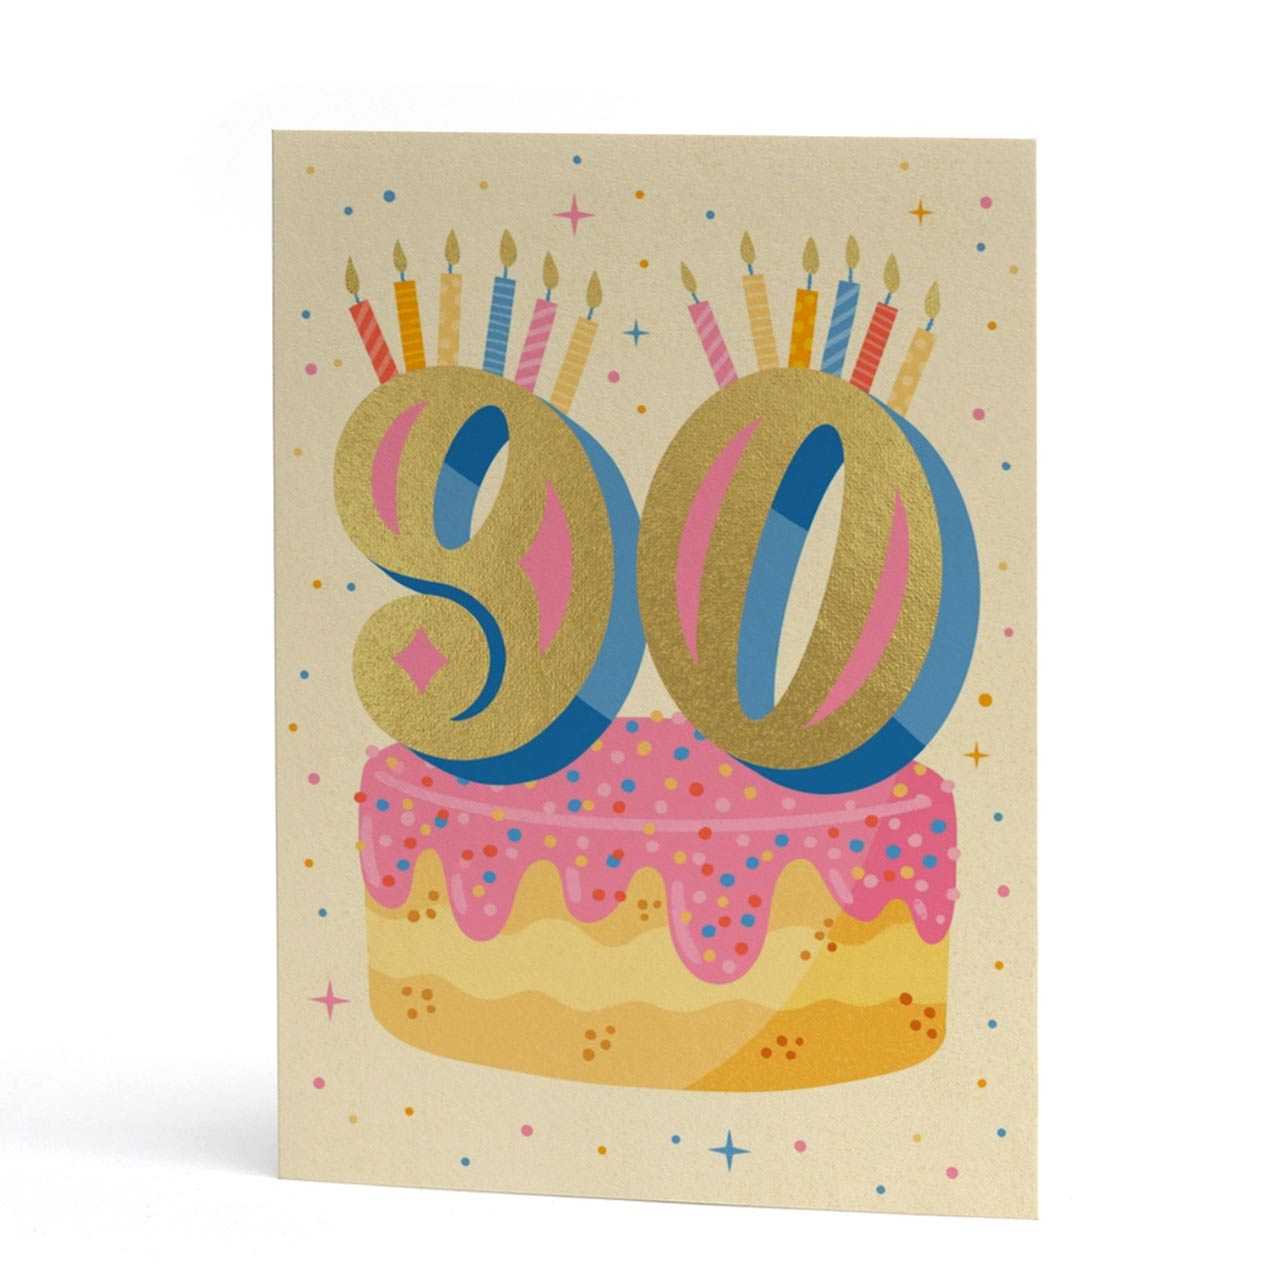 90th Birthday Gold Foil Number Card